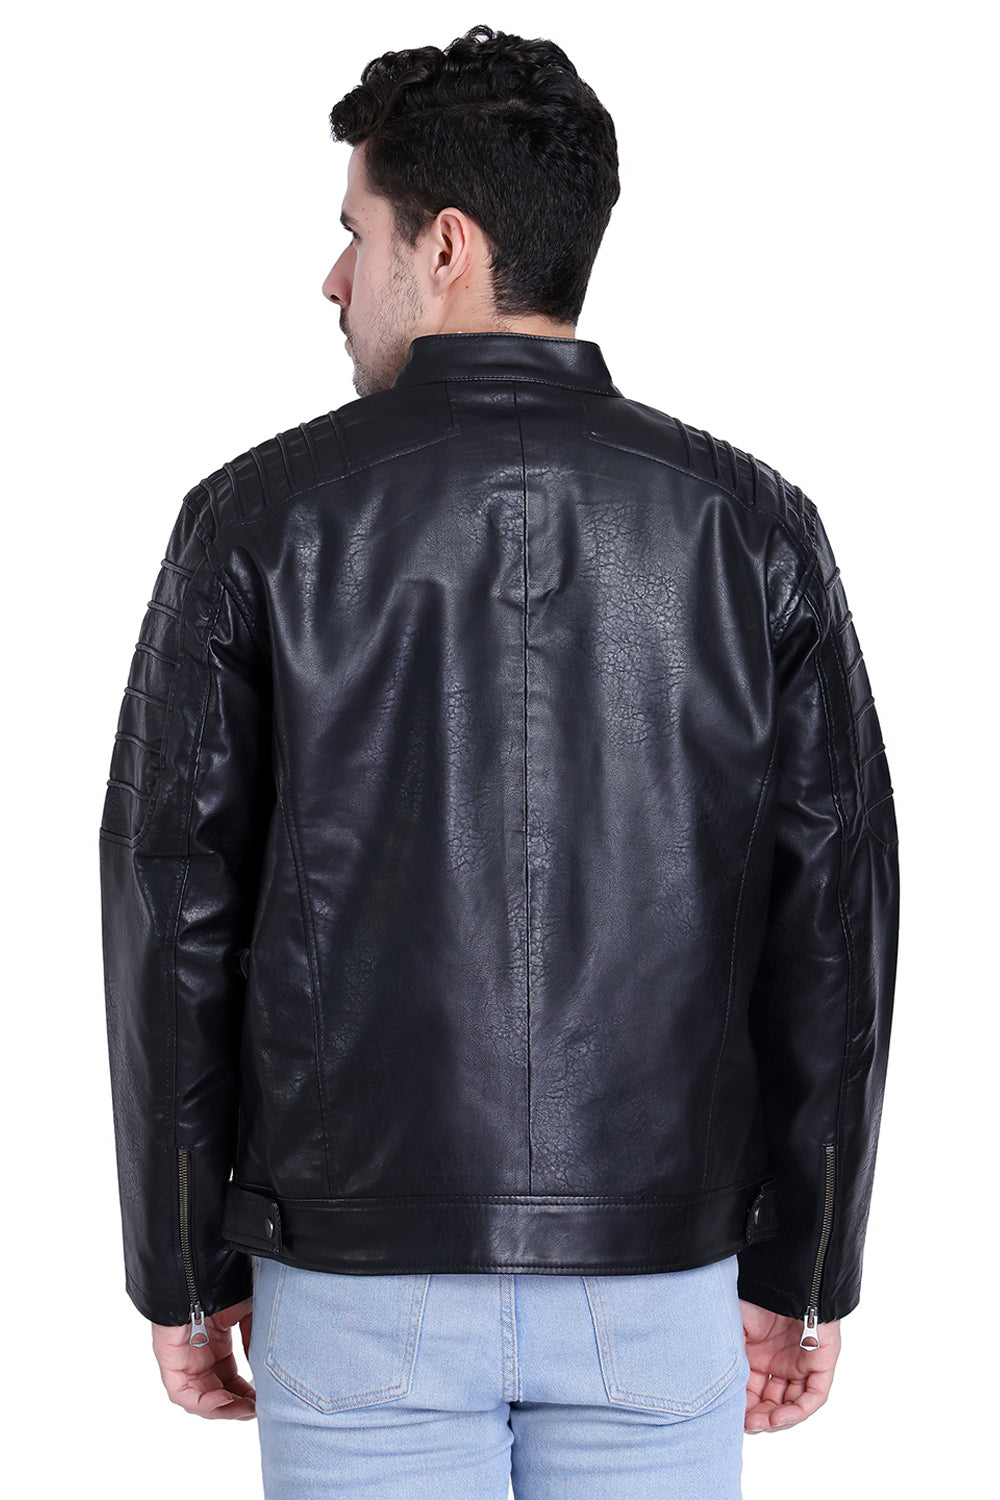 Justanned Grease Black Leather Jacket